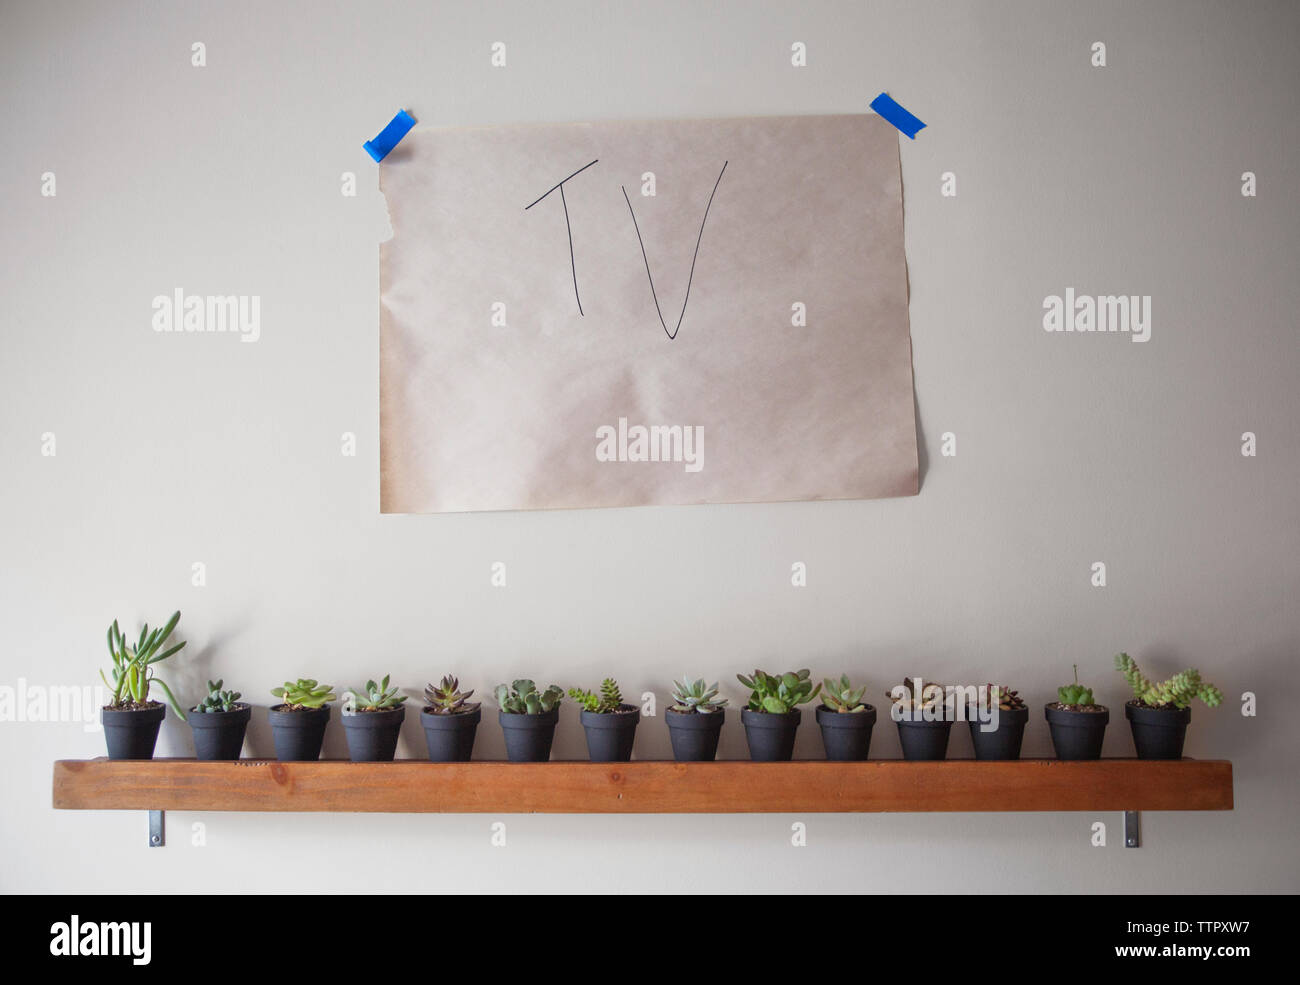 Paper with text stuck above plants on wall at home Stock Photo